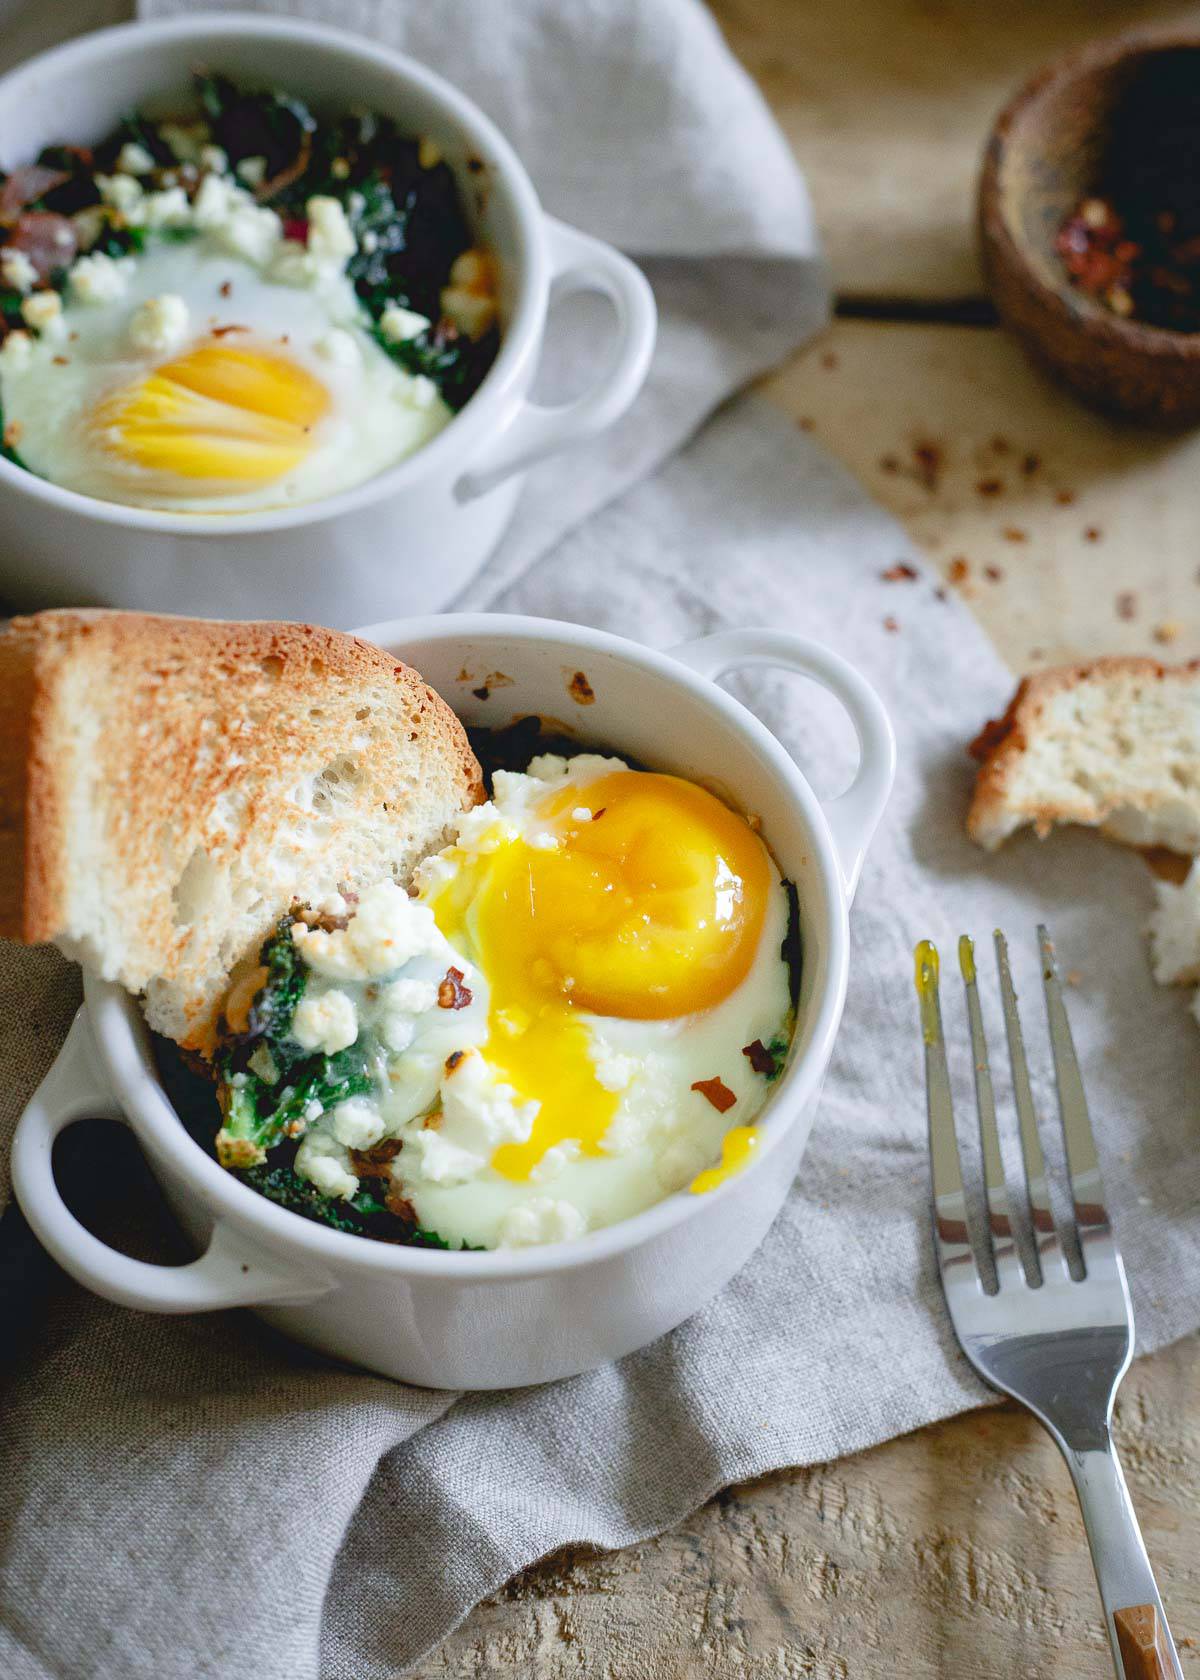 For nights when there's nothing else to eat, this kale feta egg bake is an easy and quick dinner option.